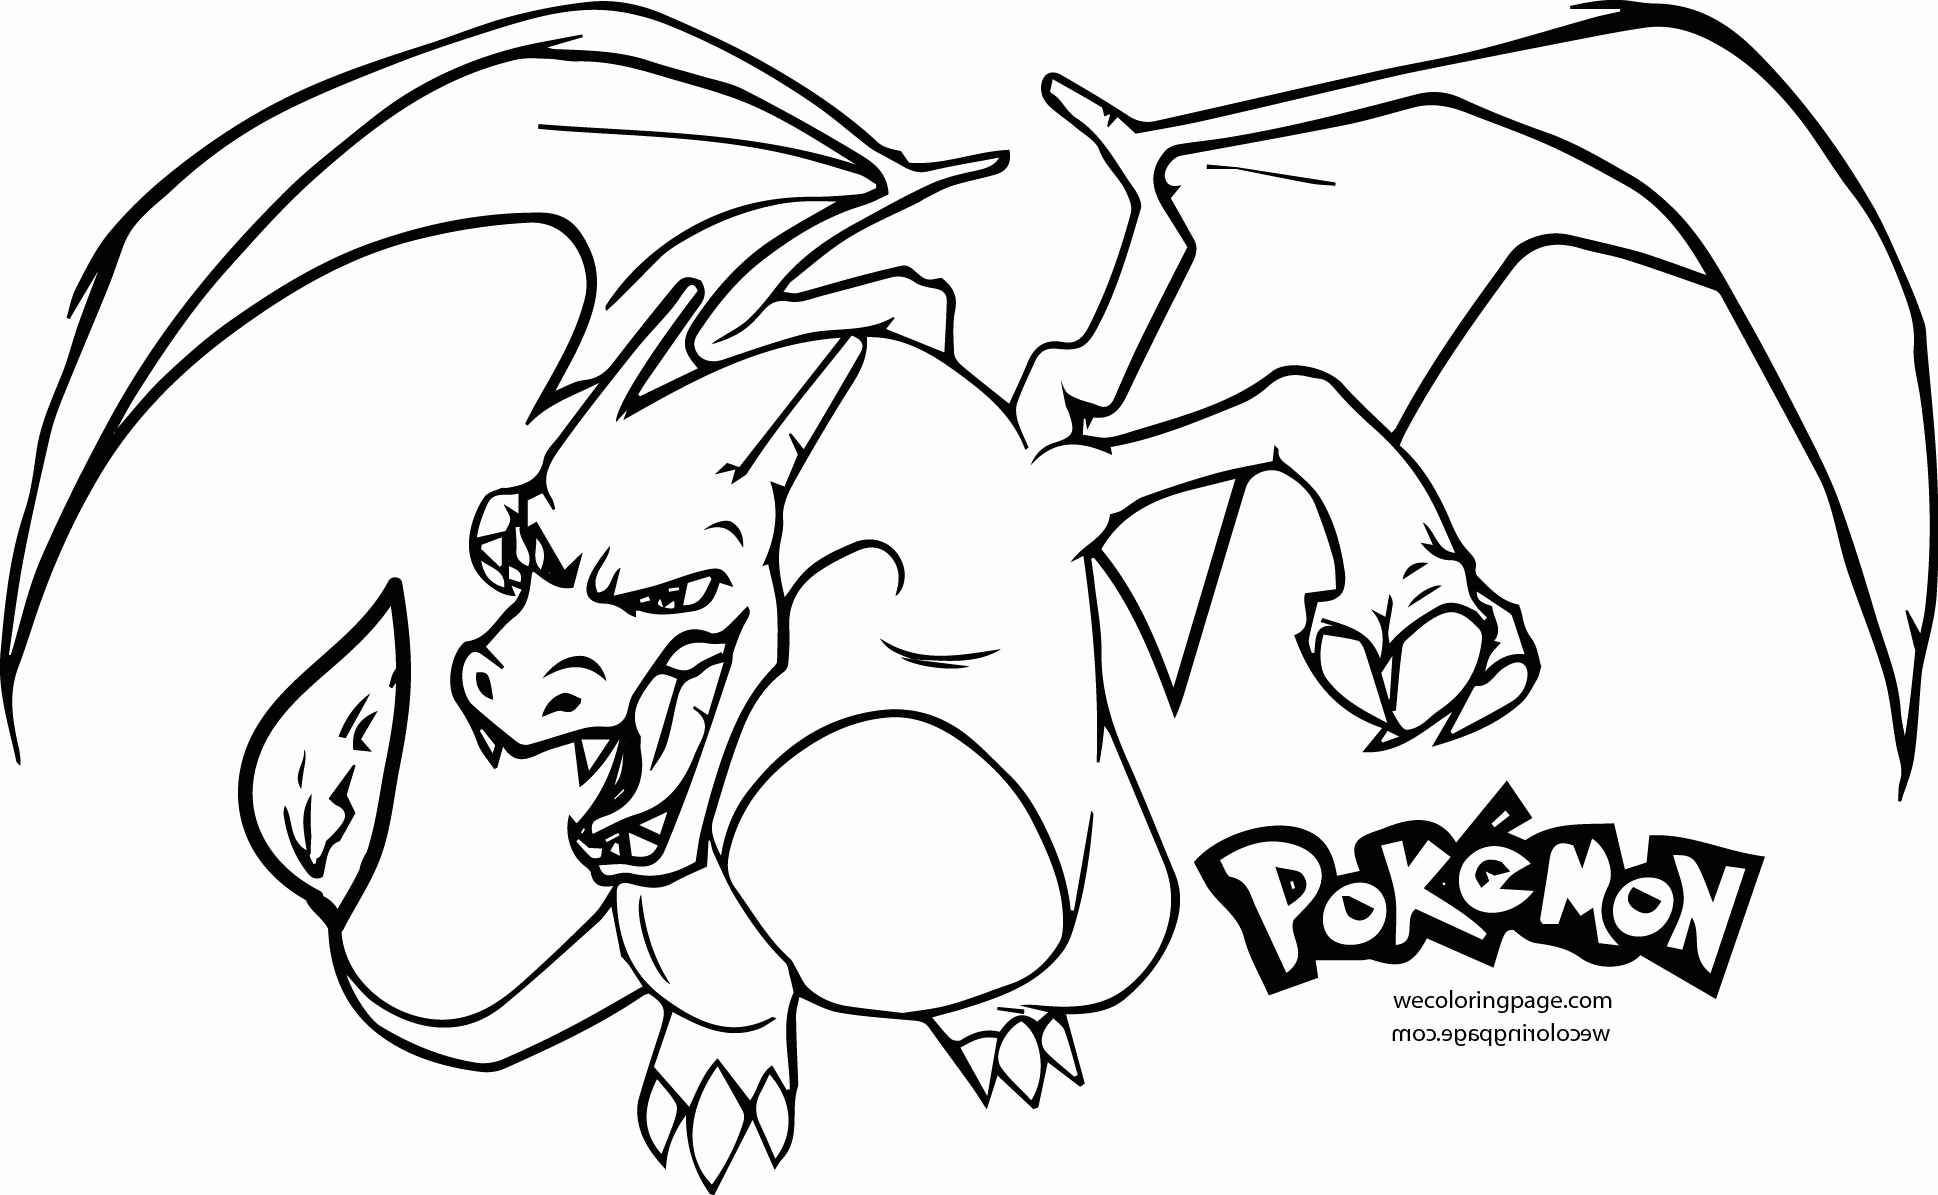 Pokemon Charizard Coloring Pages - Coloring Page